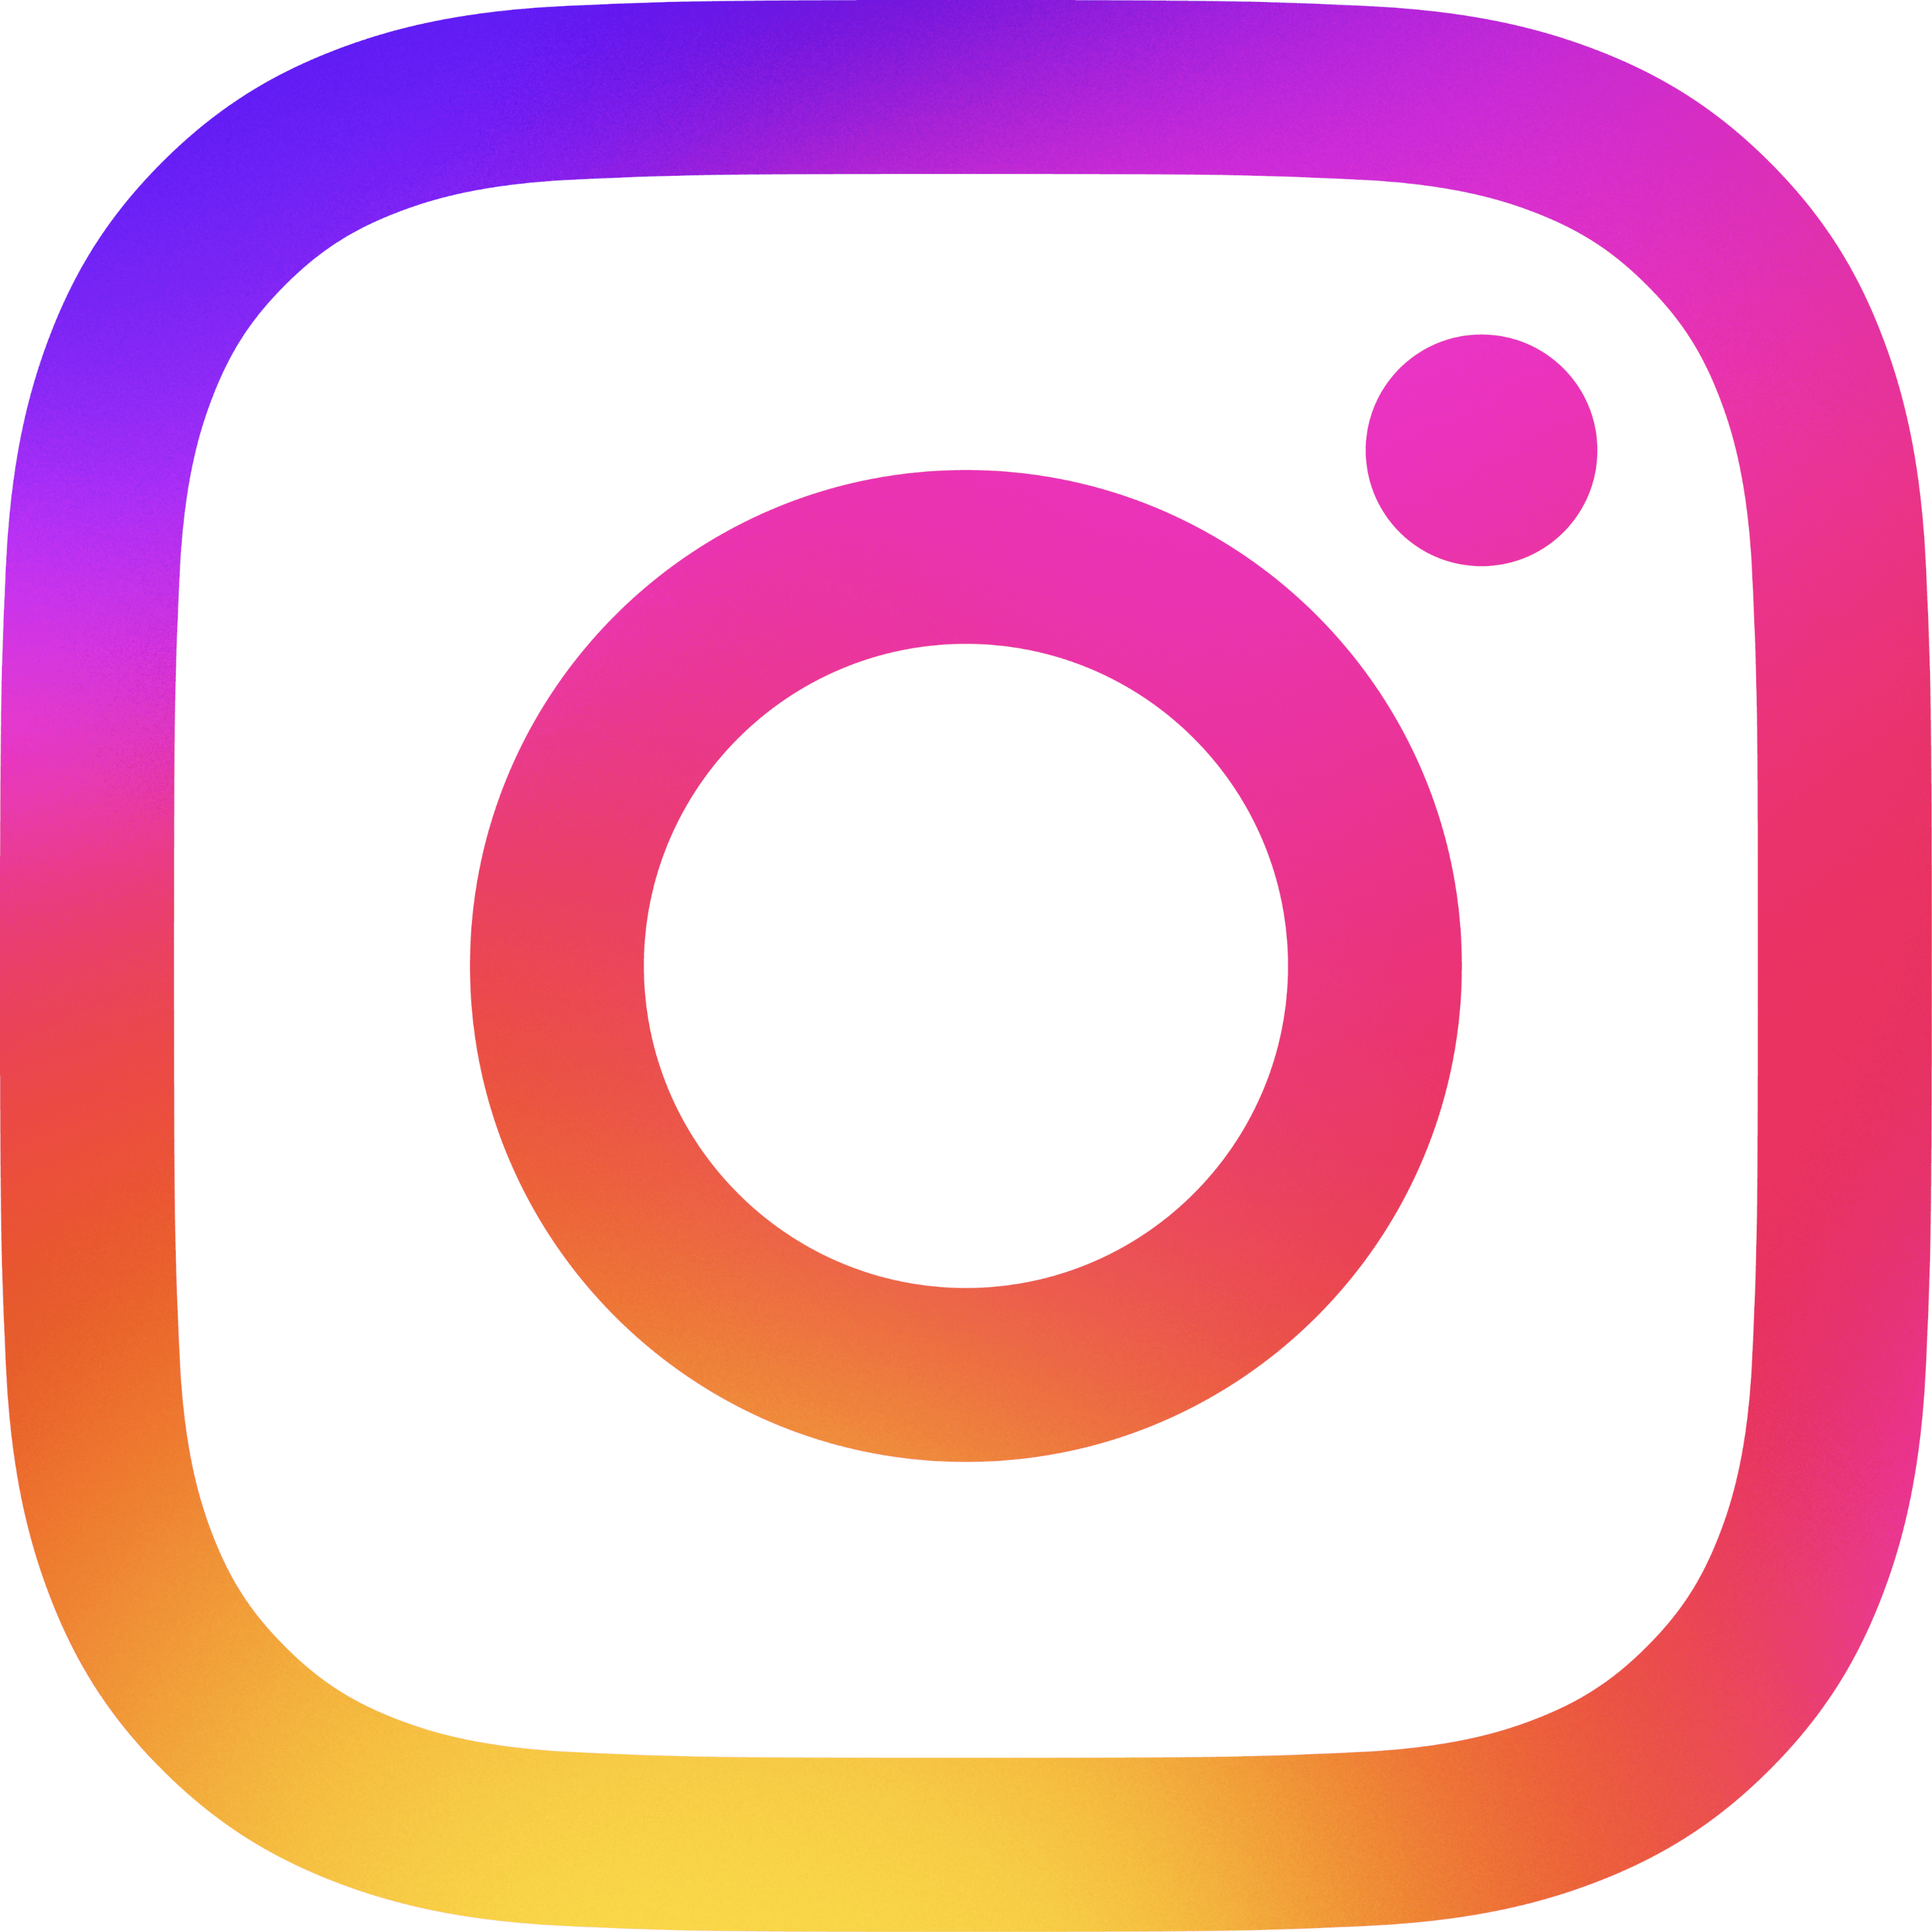 View upcoming events on our Instagram